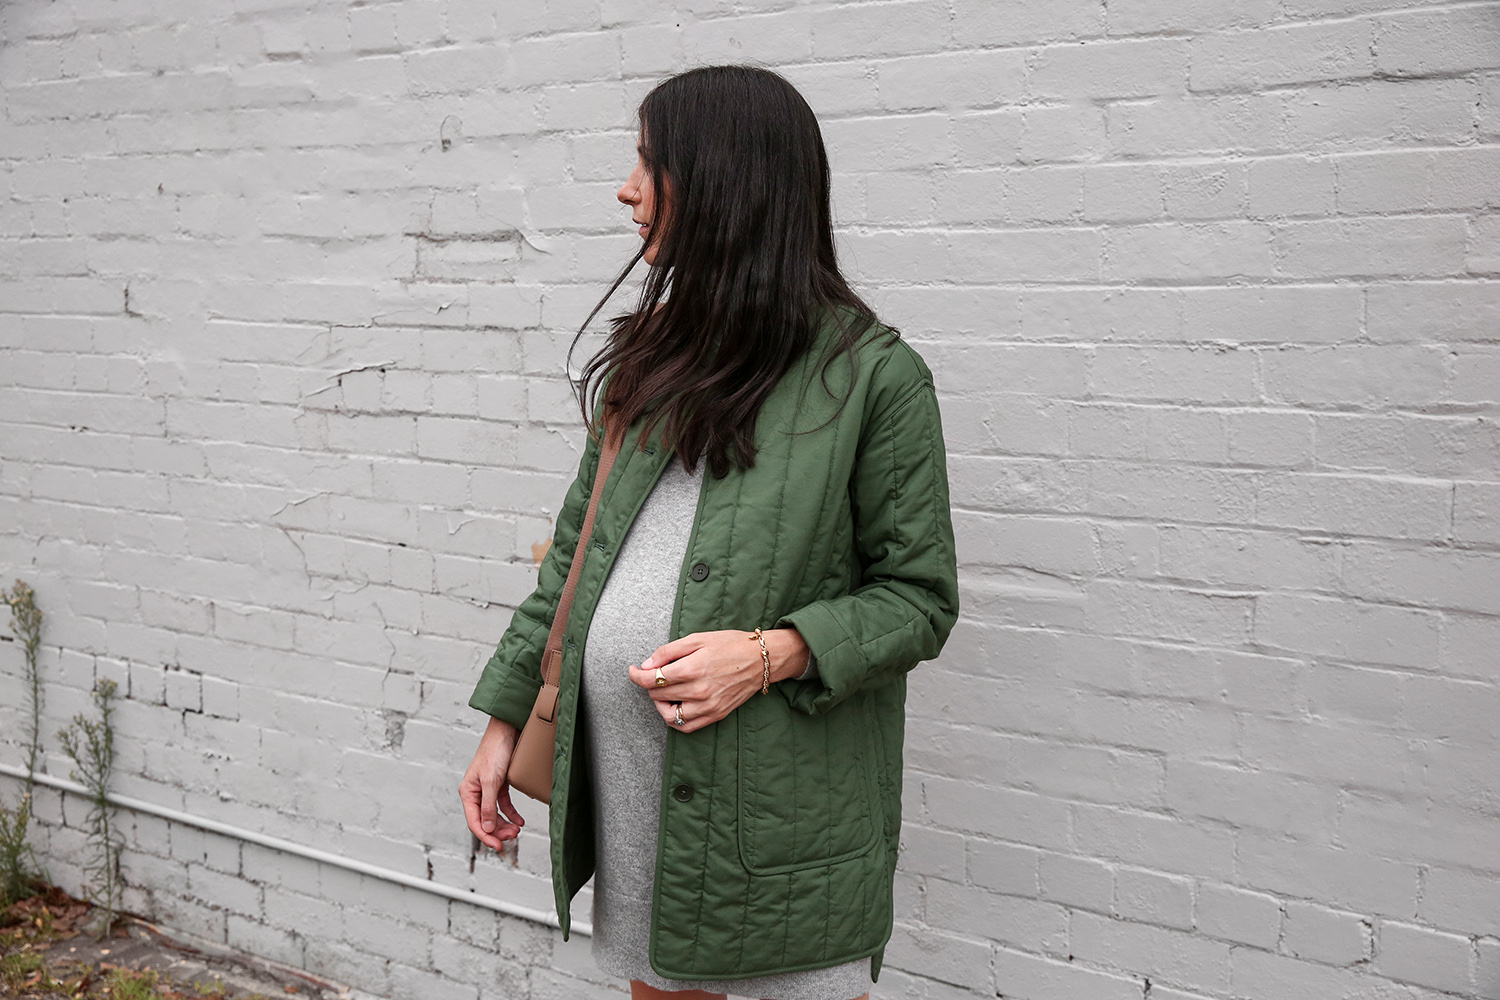 Jamie Lee of Mademoiselle wearing an Everlane cashmere mini dress and cotton quilted jacket